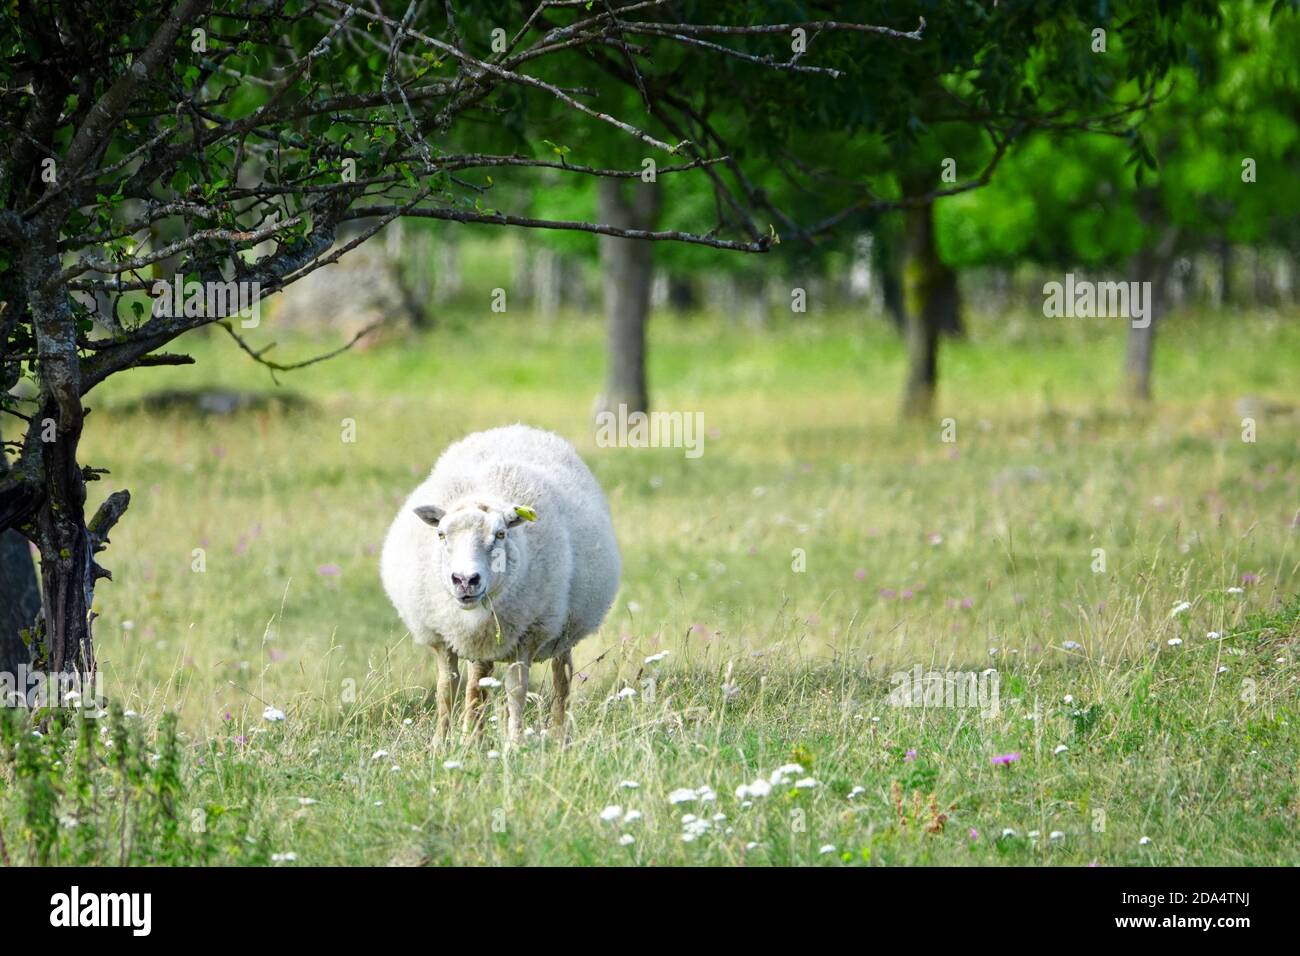 Farmland View of a Woolly Sheep in a Green forest Field. Wild animial with horns - sheep portrait Stock Photo